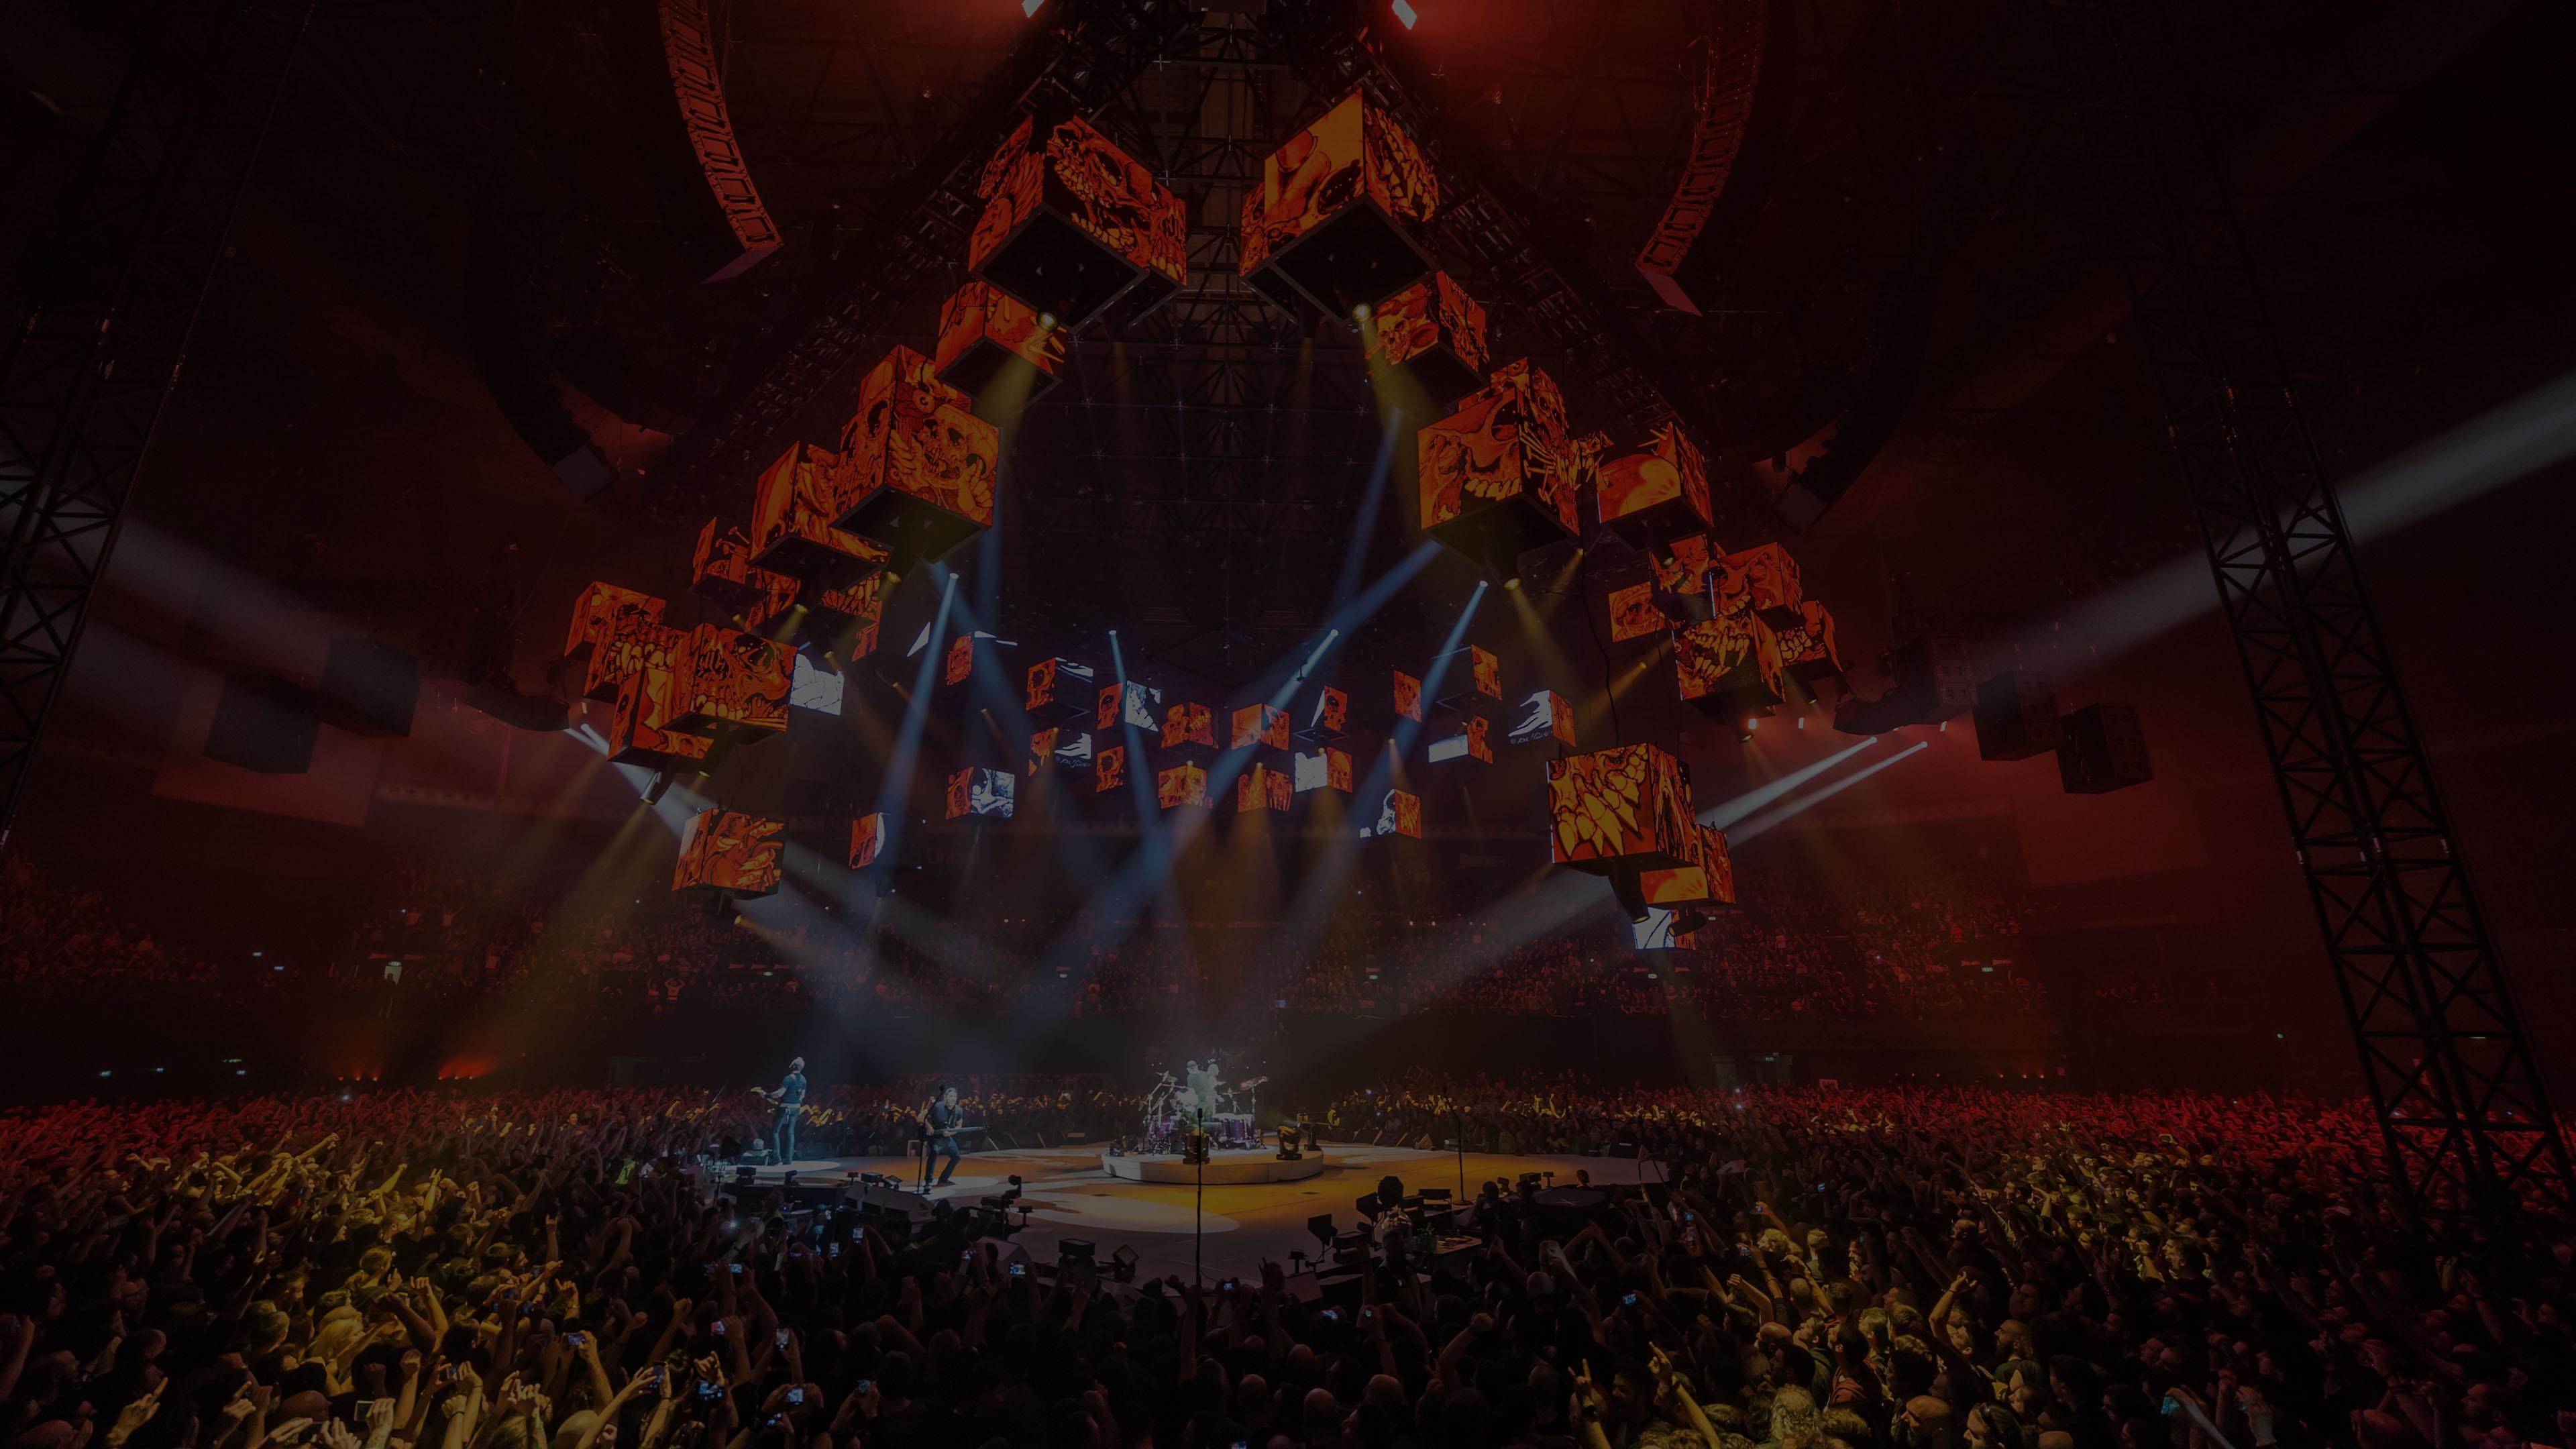 Metallica at Unipol Arena in Bologna, Italy on February 12, 2018